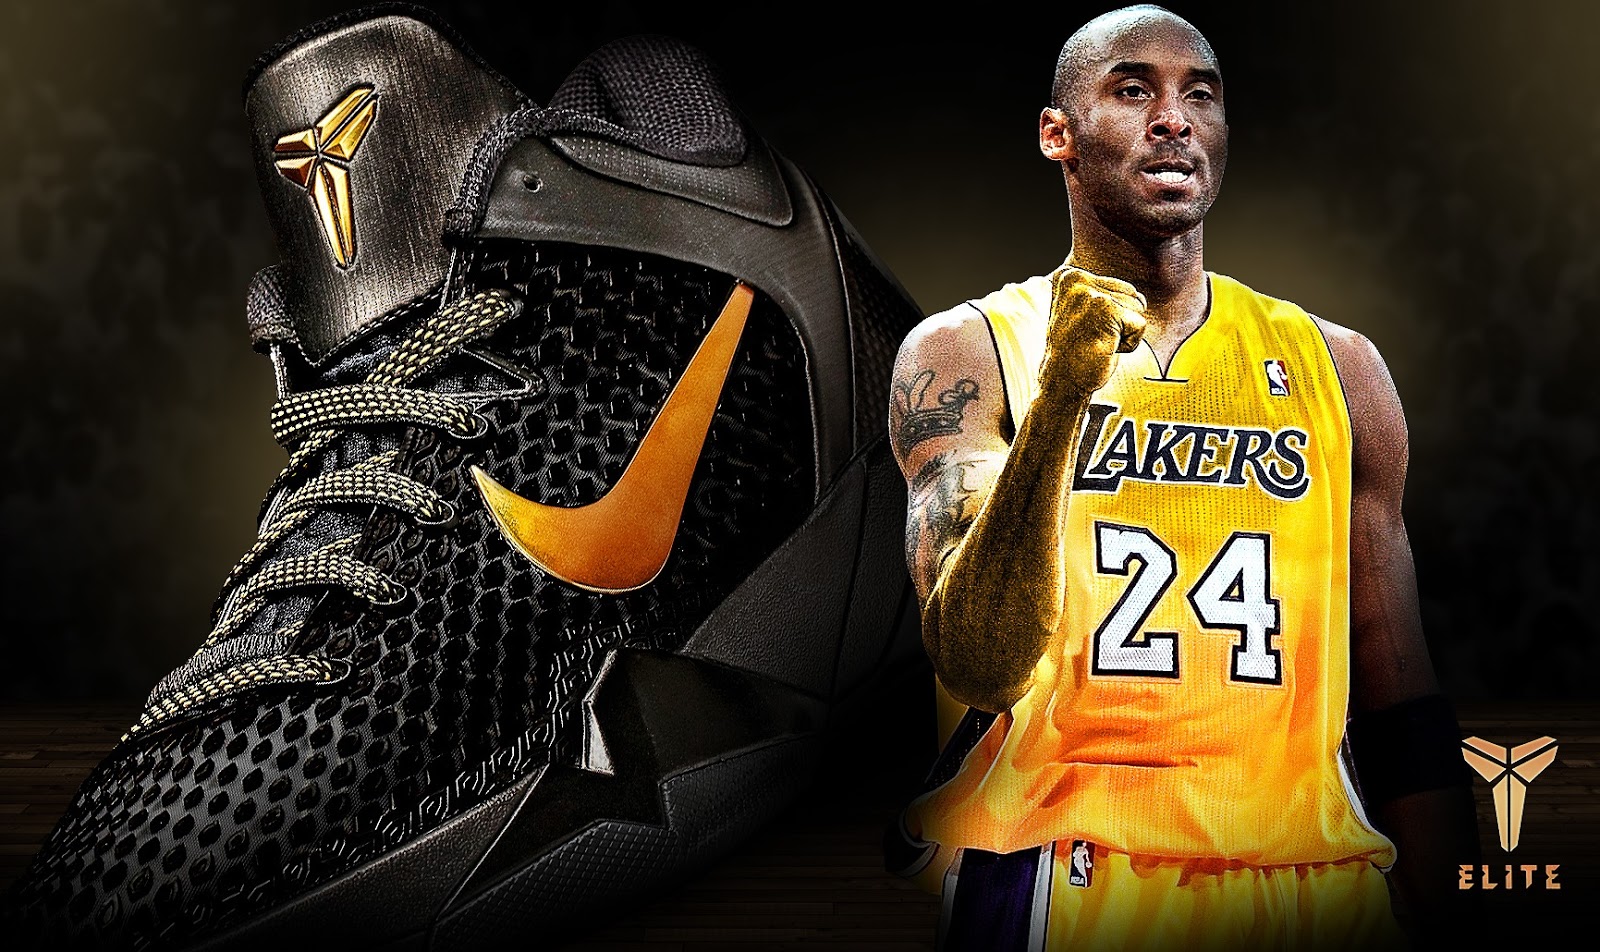 Find more Kobe Bryant New HD Wallpapers 2013. 